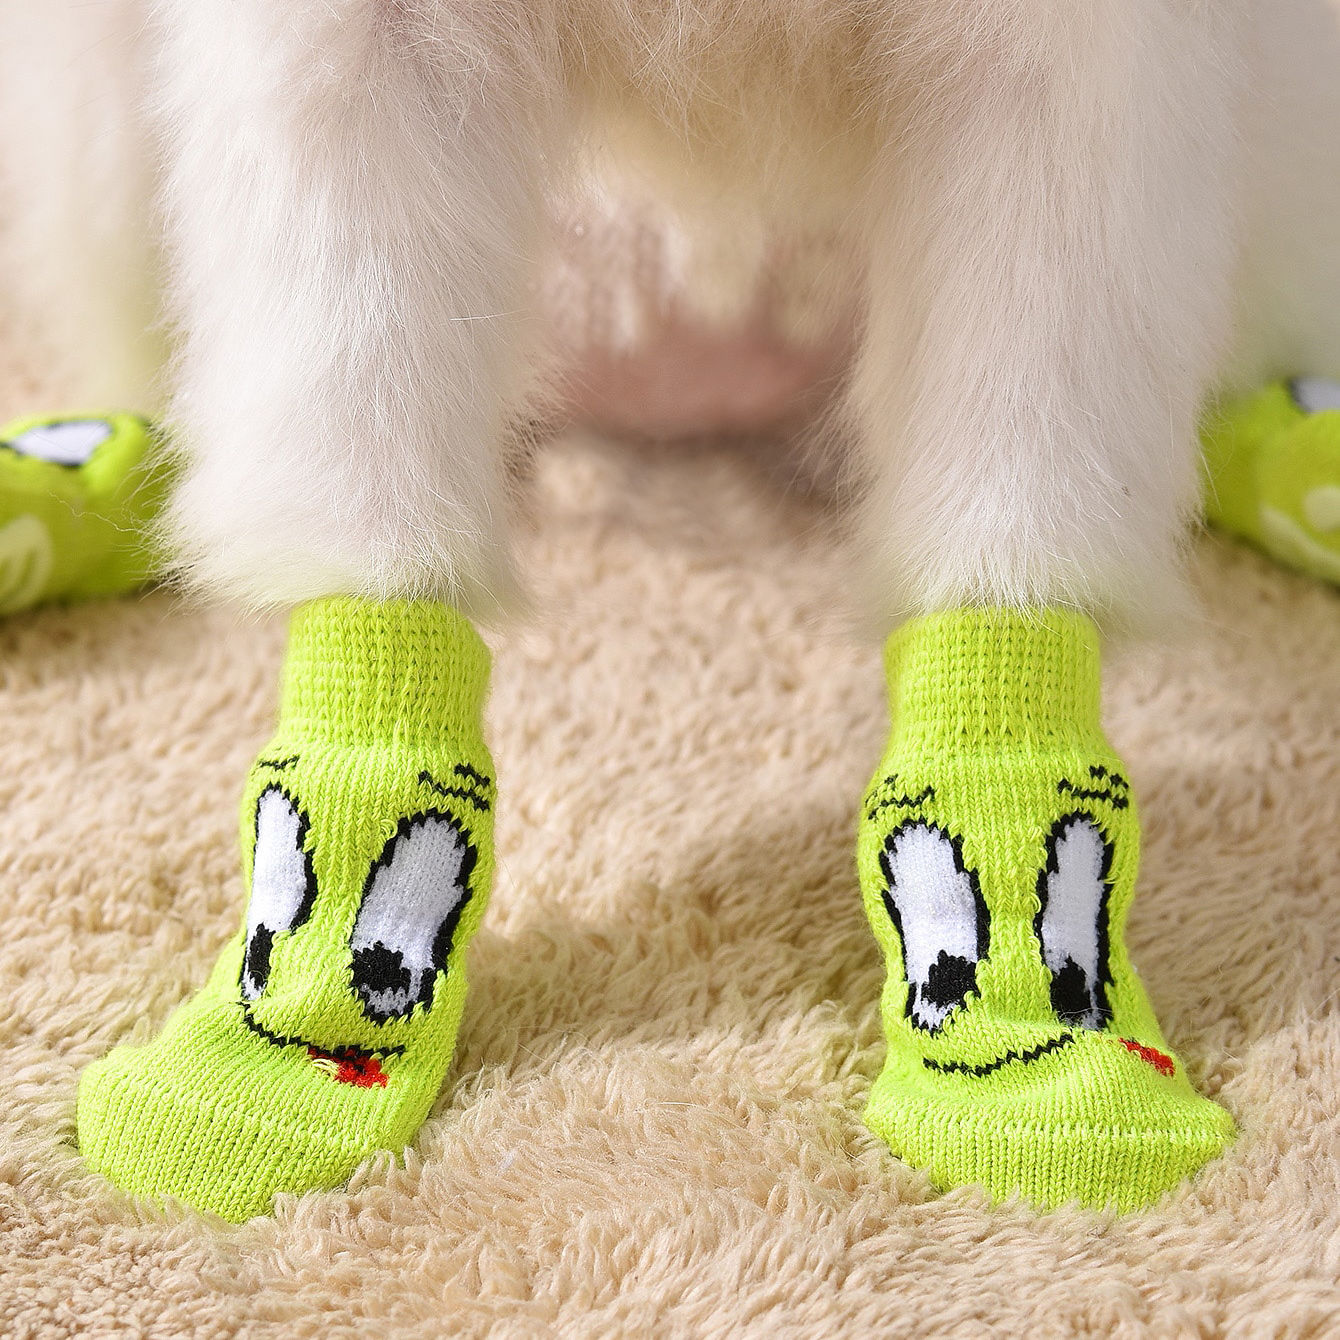 Keep Your Puppys Paws Protected With Anti Scratch Anti Dirty Non Slip Dog  Socks, Shop Now For Limited-time Deals